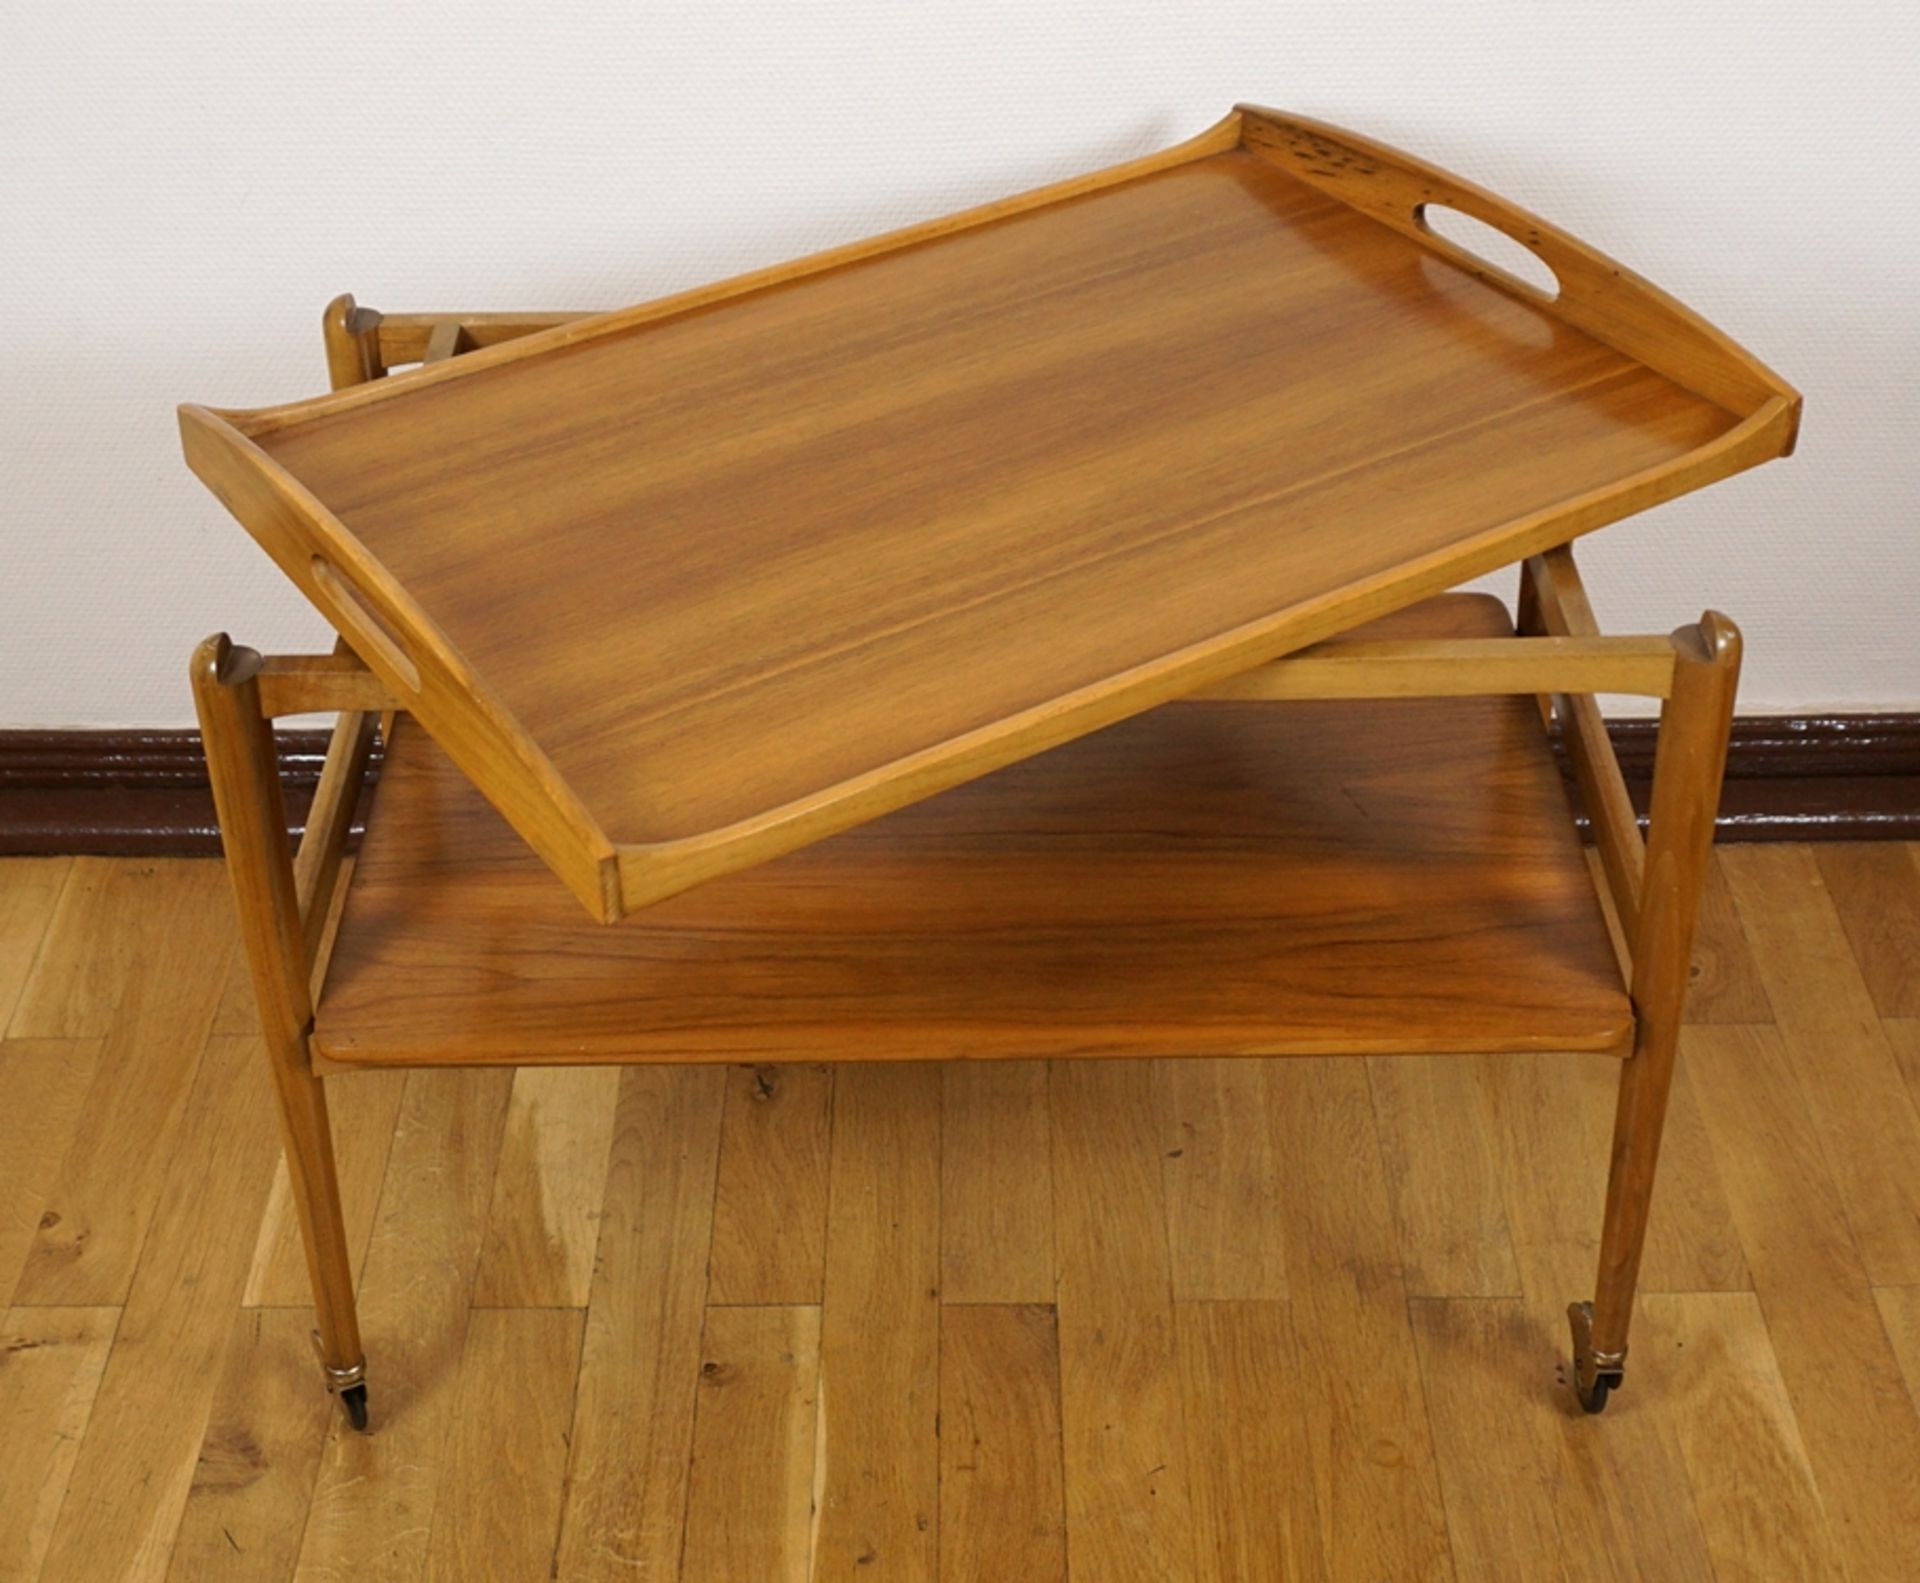 Serving trolley with tray, walnut, 1960s - Image 3 of 3